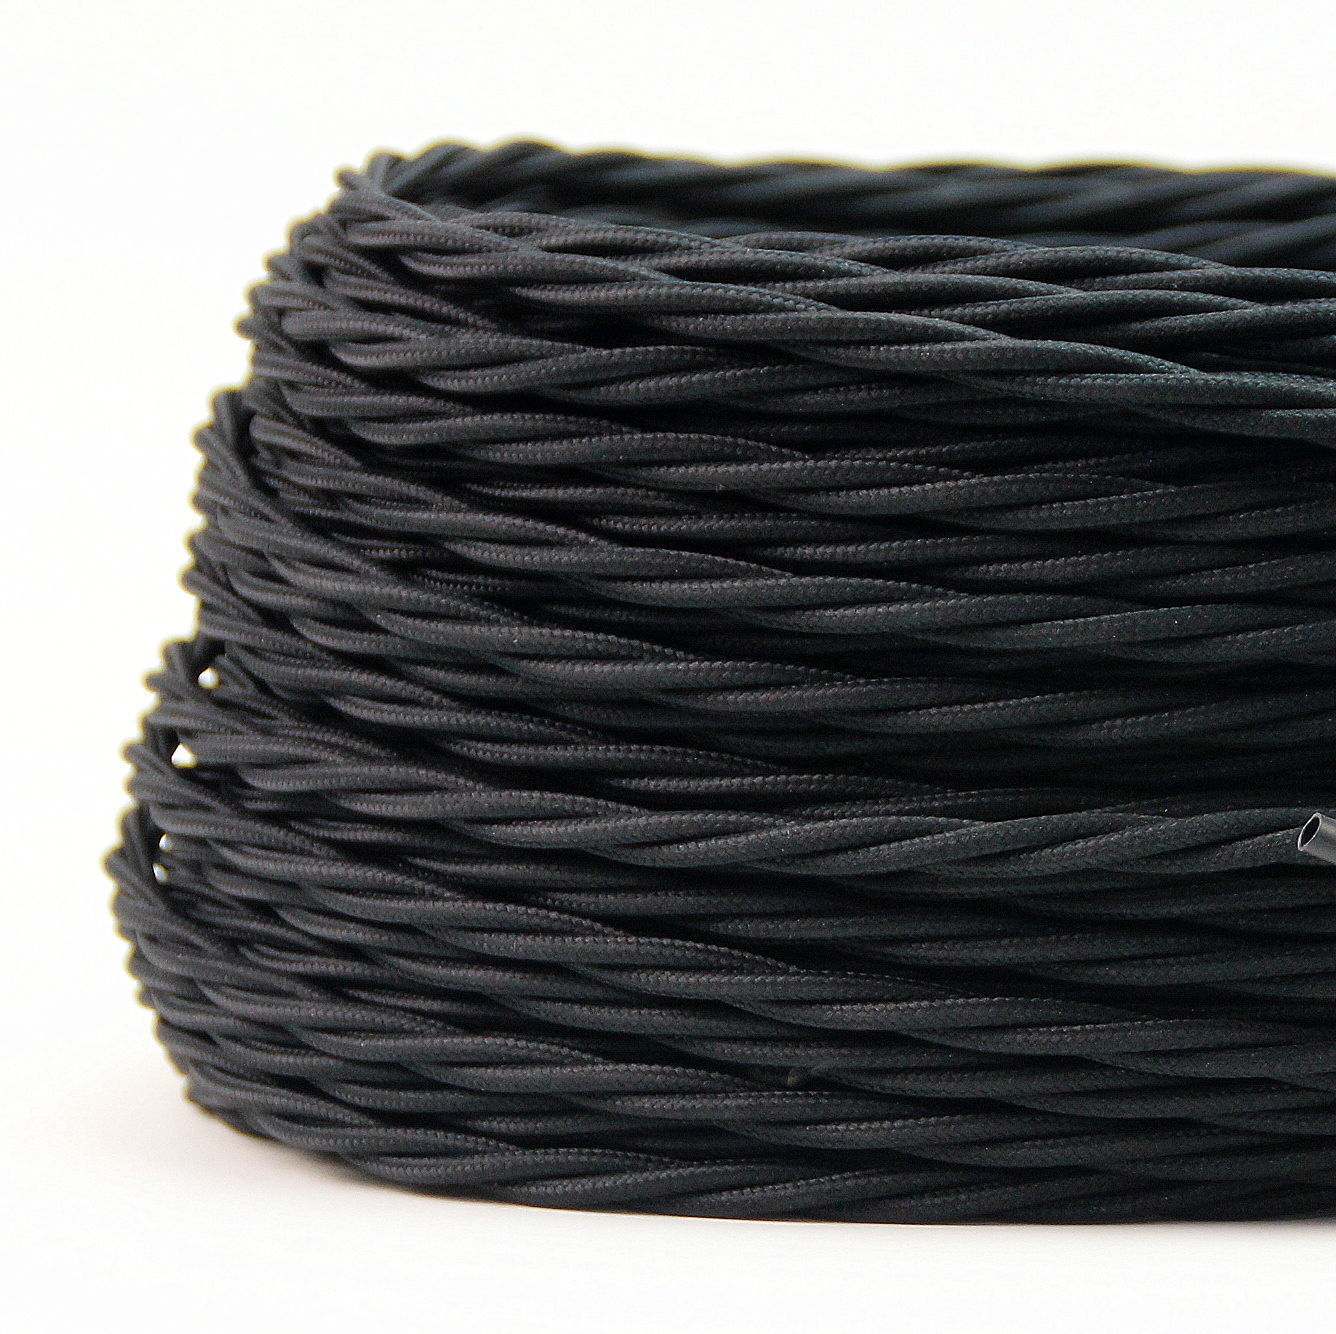 Vintage 5  meter 2 core Twisted Braided Cable, Electrical Fabric Flexible Lamp Cable Wire Cord for UK Light